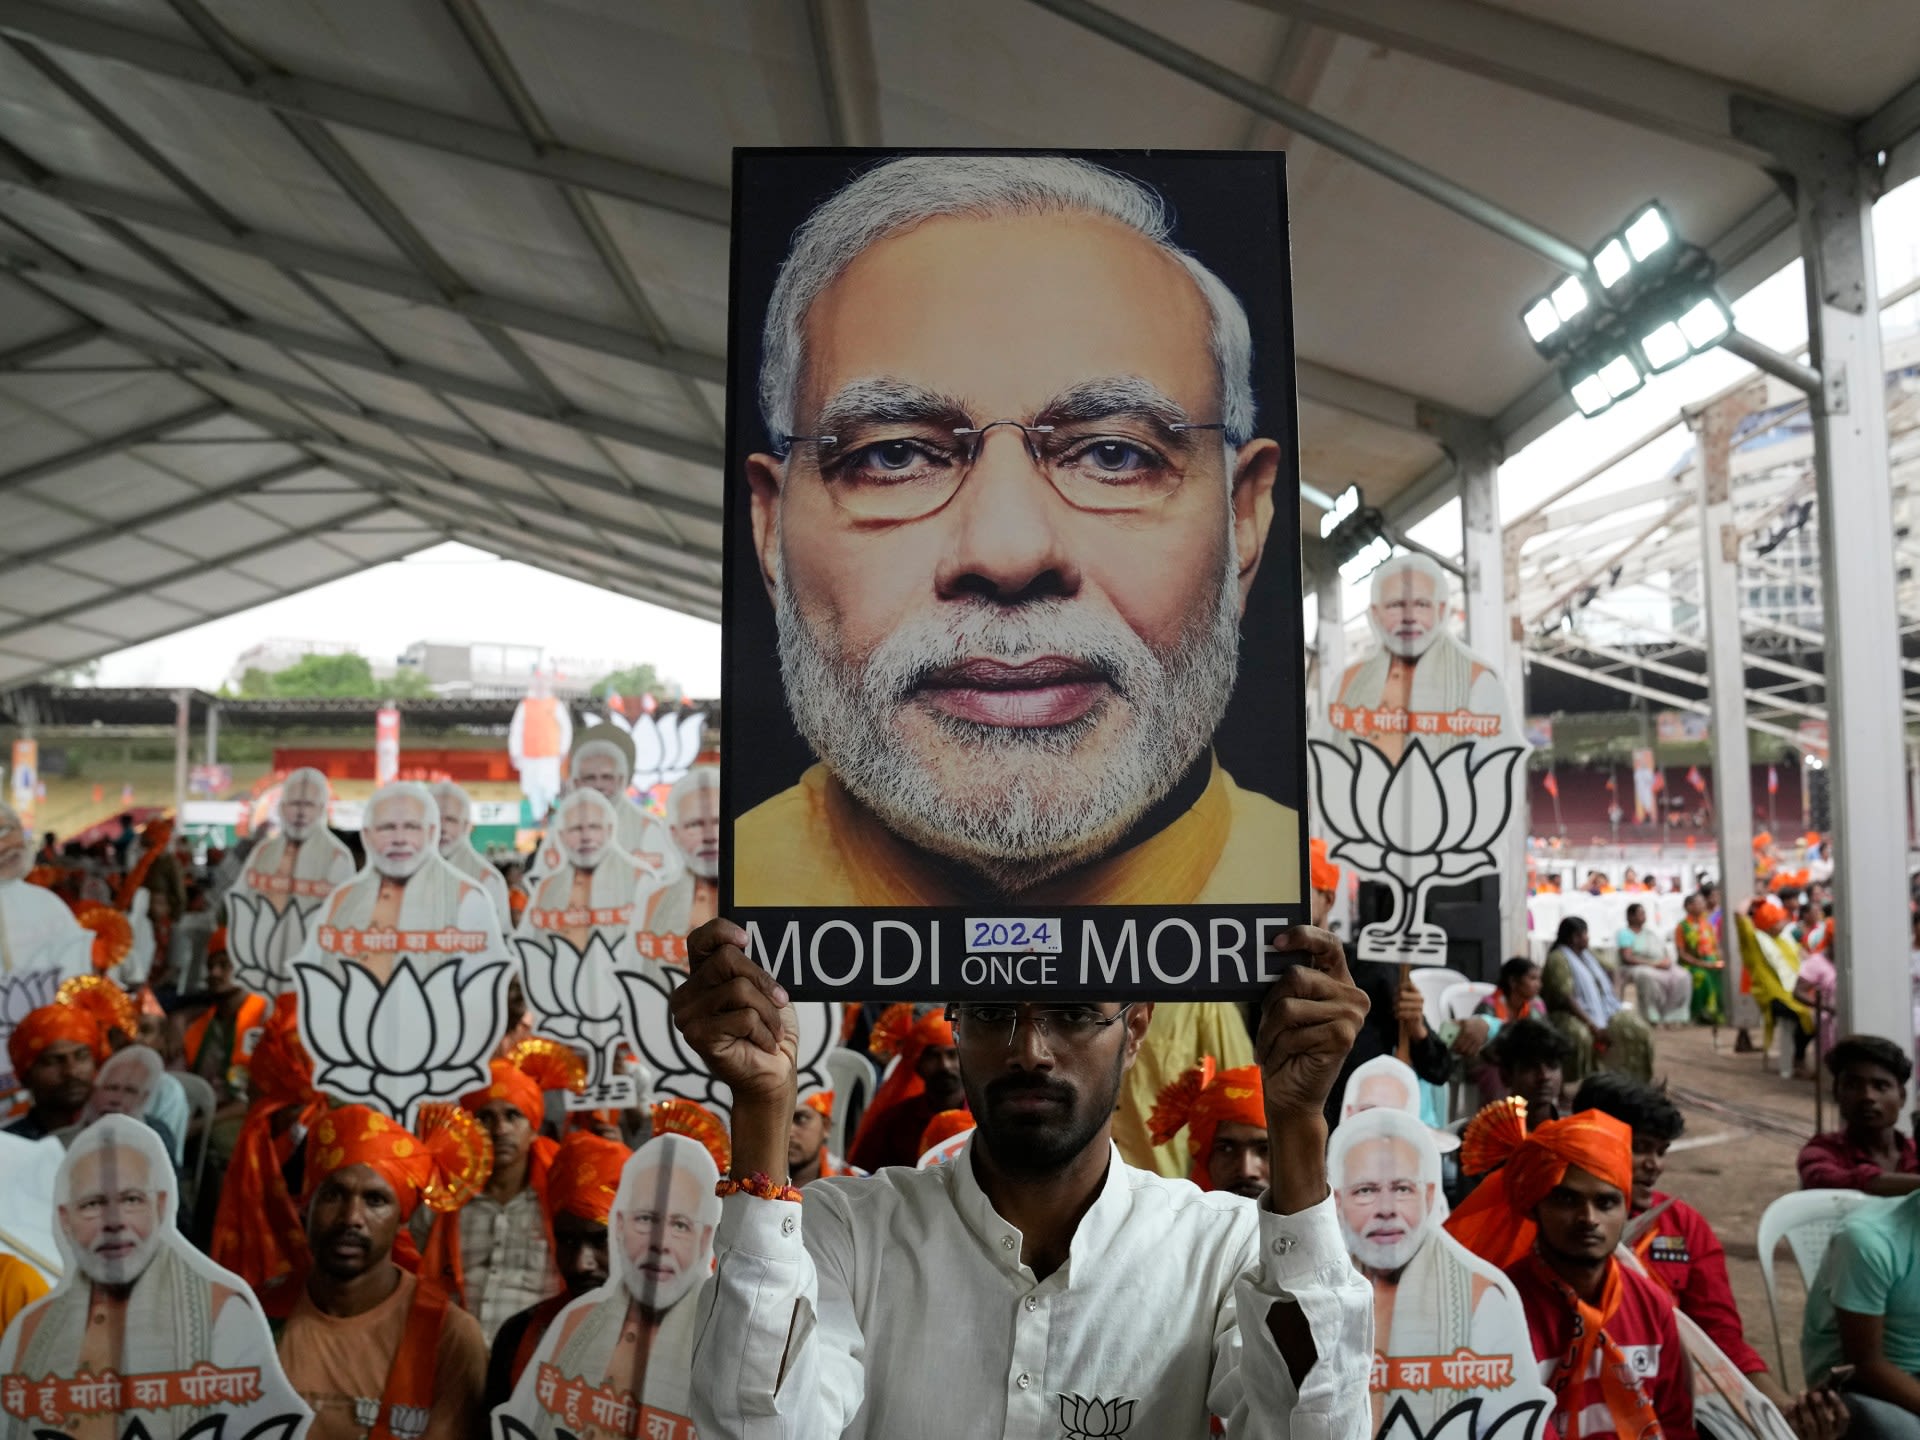 Indian government agency spent millions to promote BJP election slogans